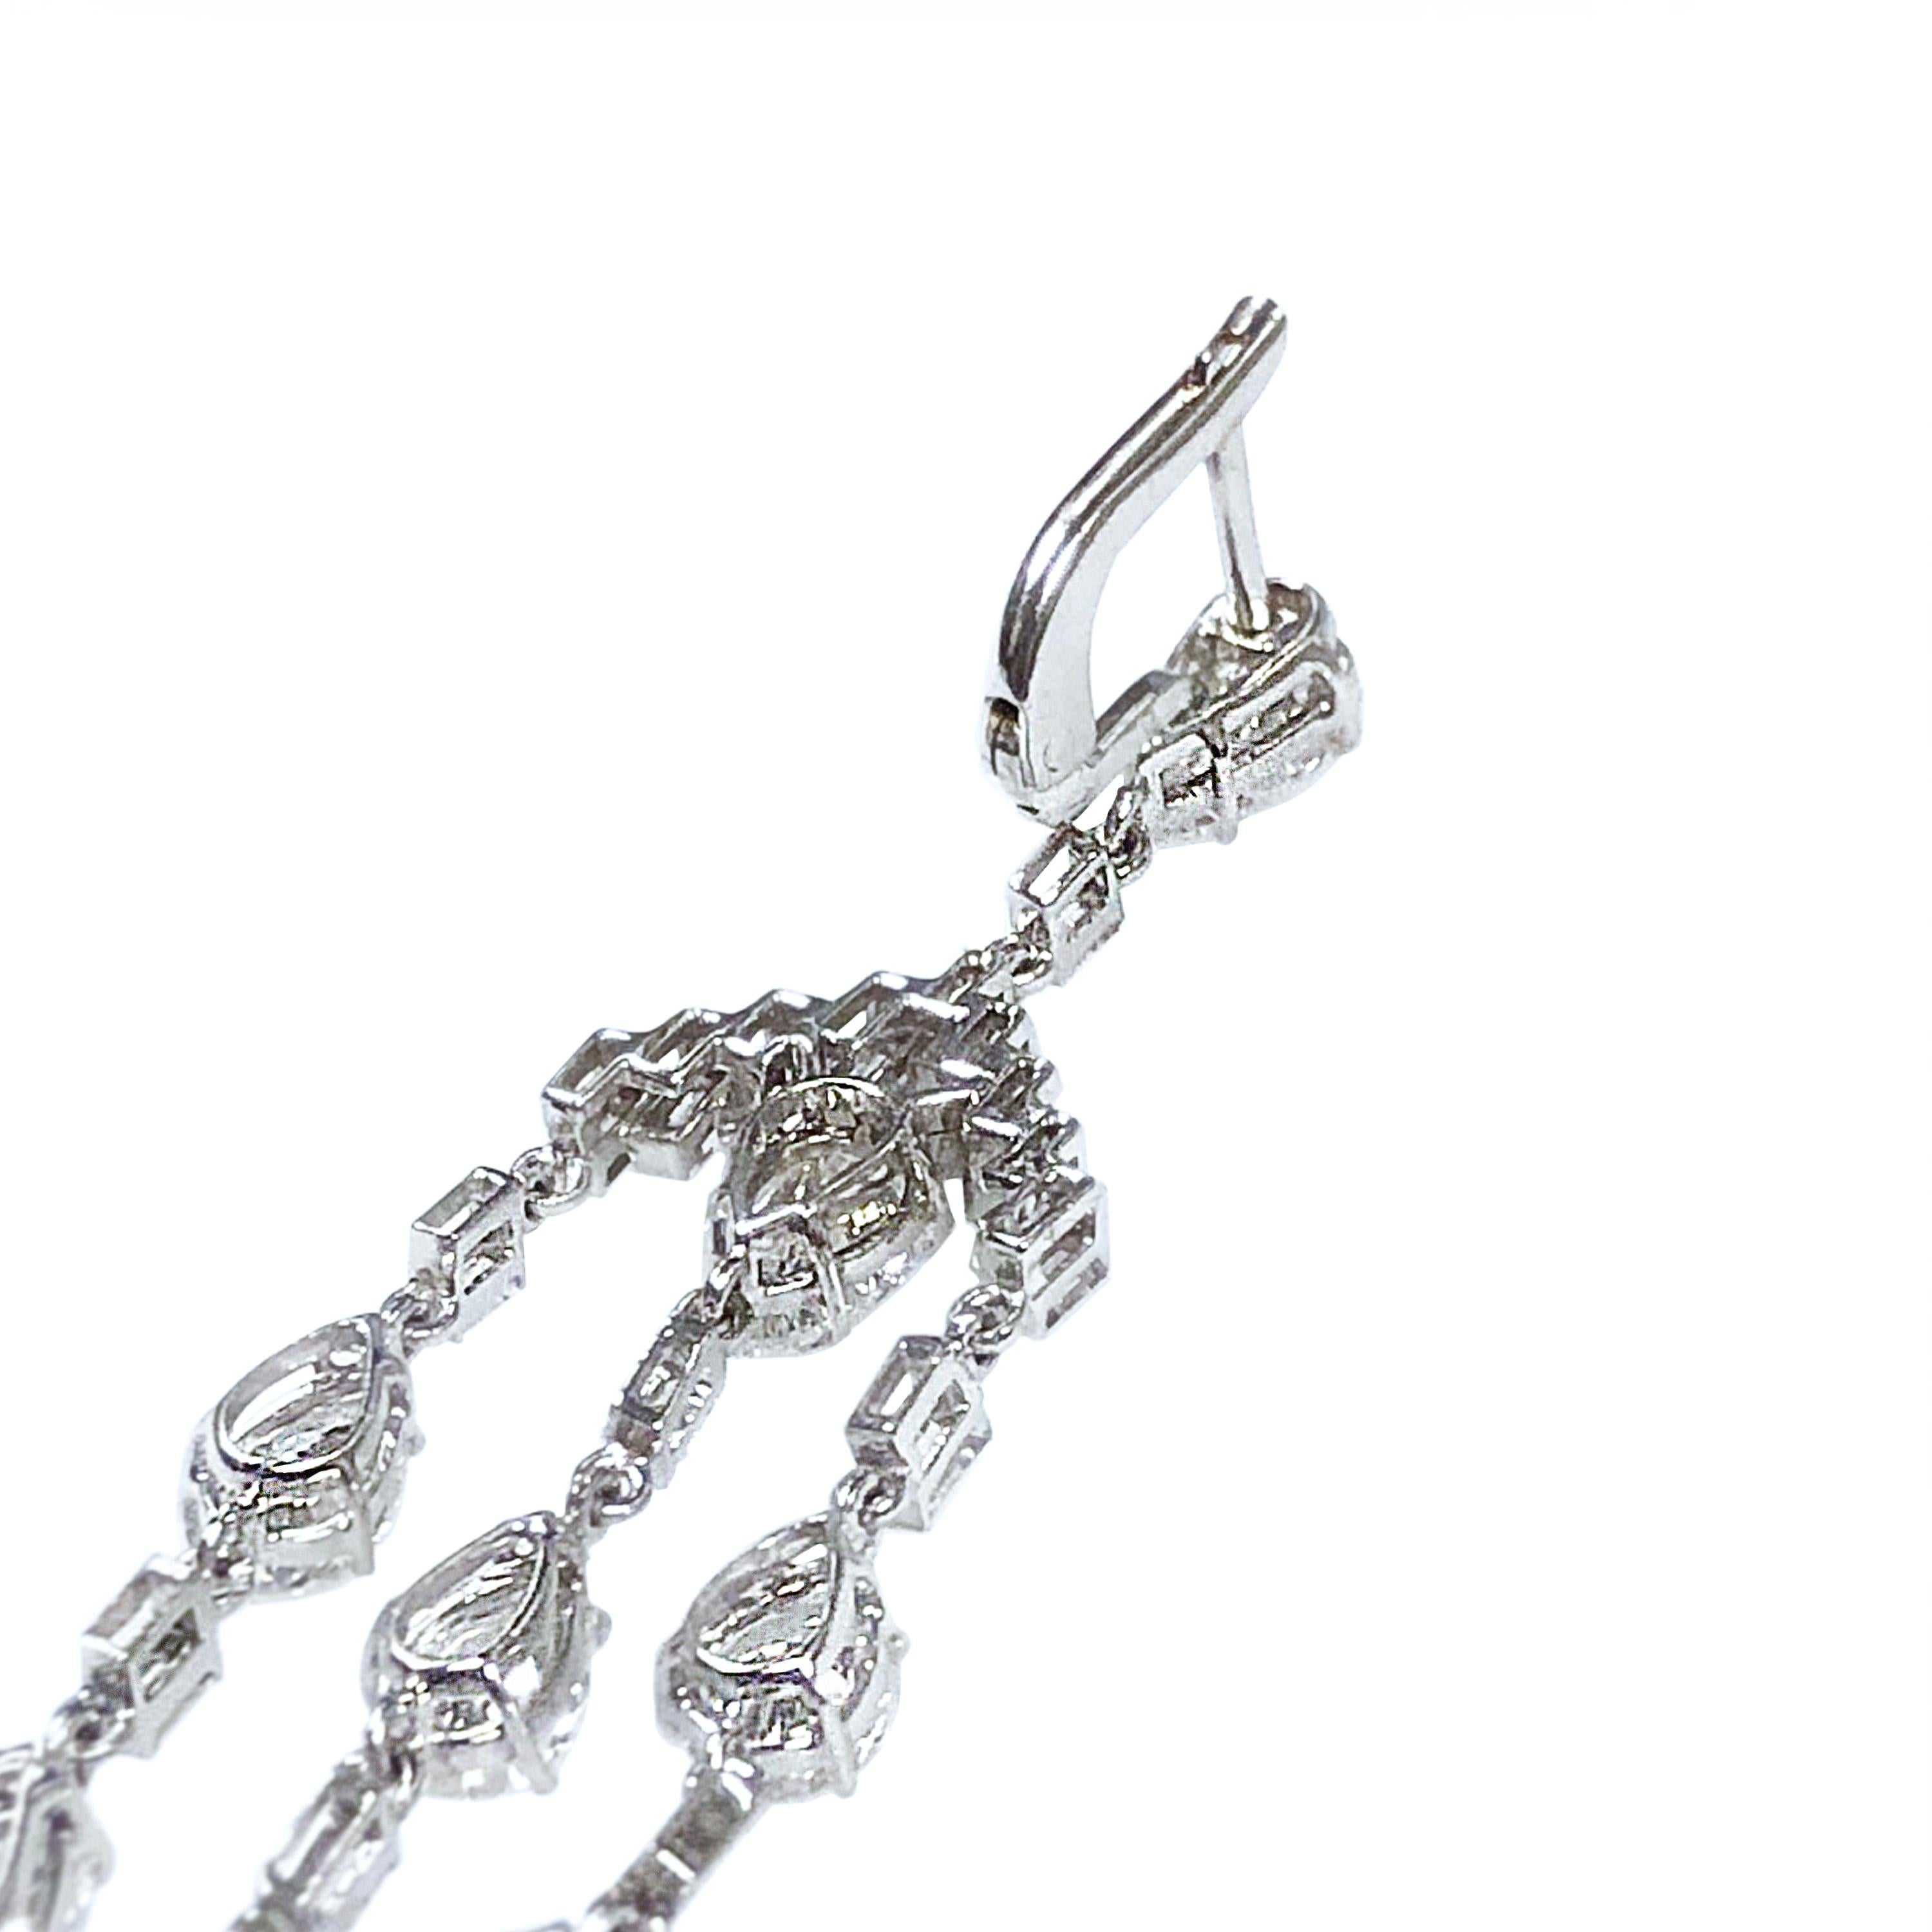 Platinum Diamond Chandelier Earrings In Excellent Condition For Sale In Chicago, IL